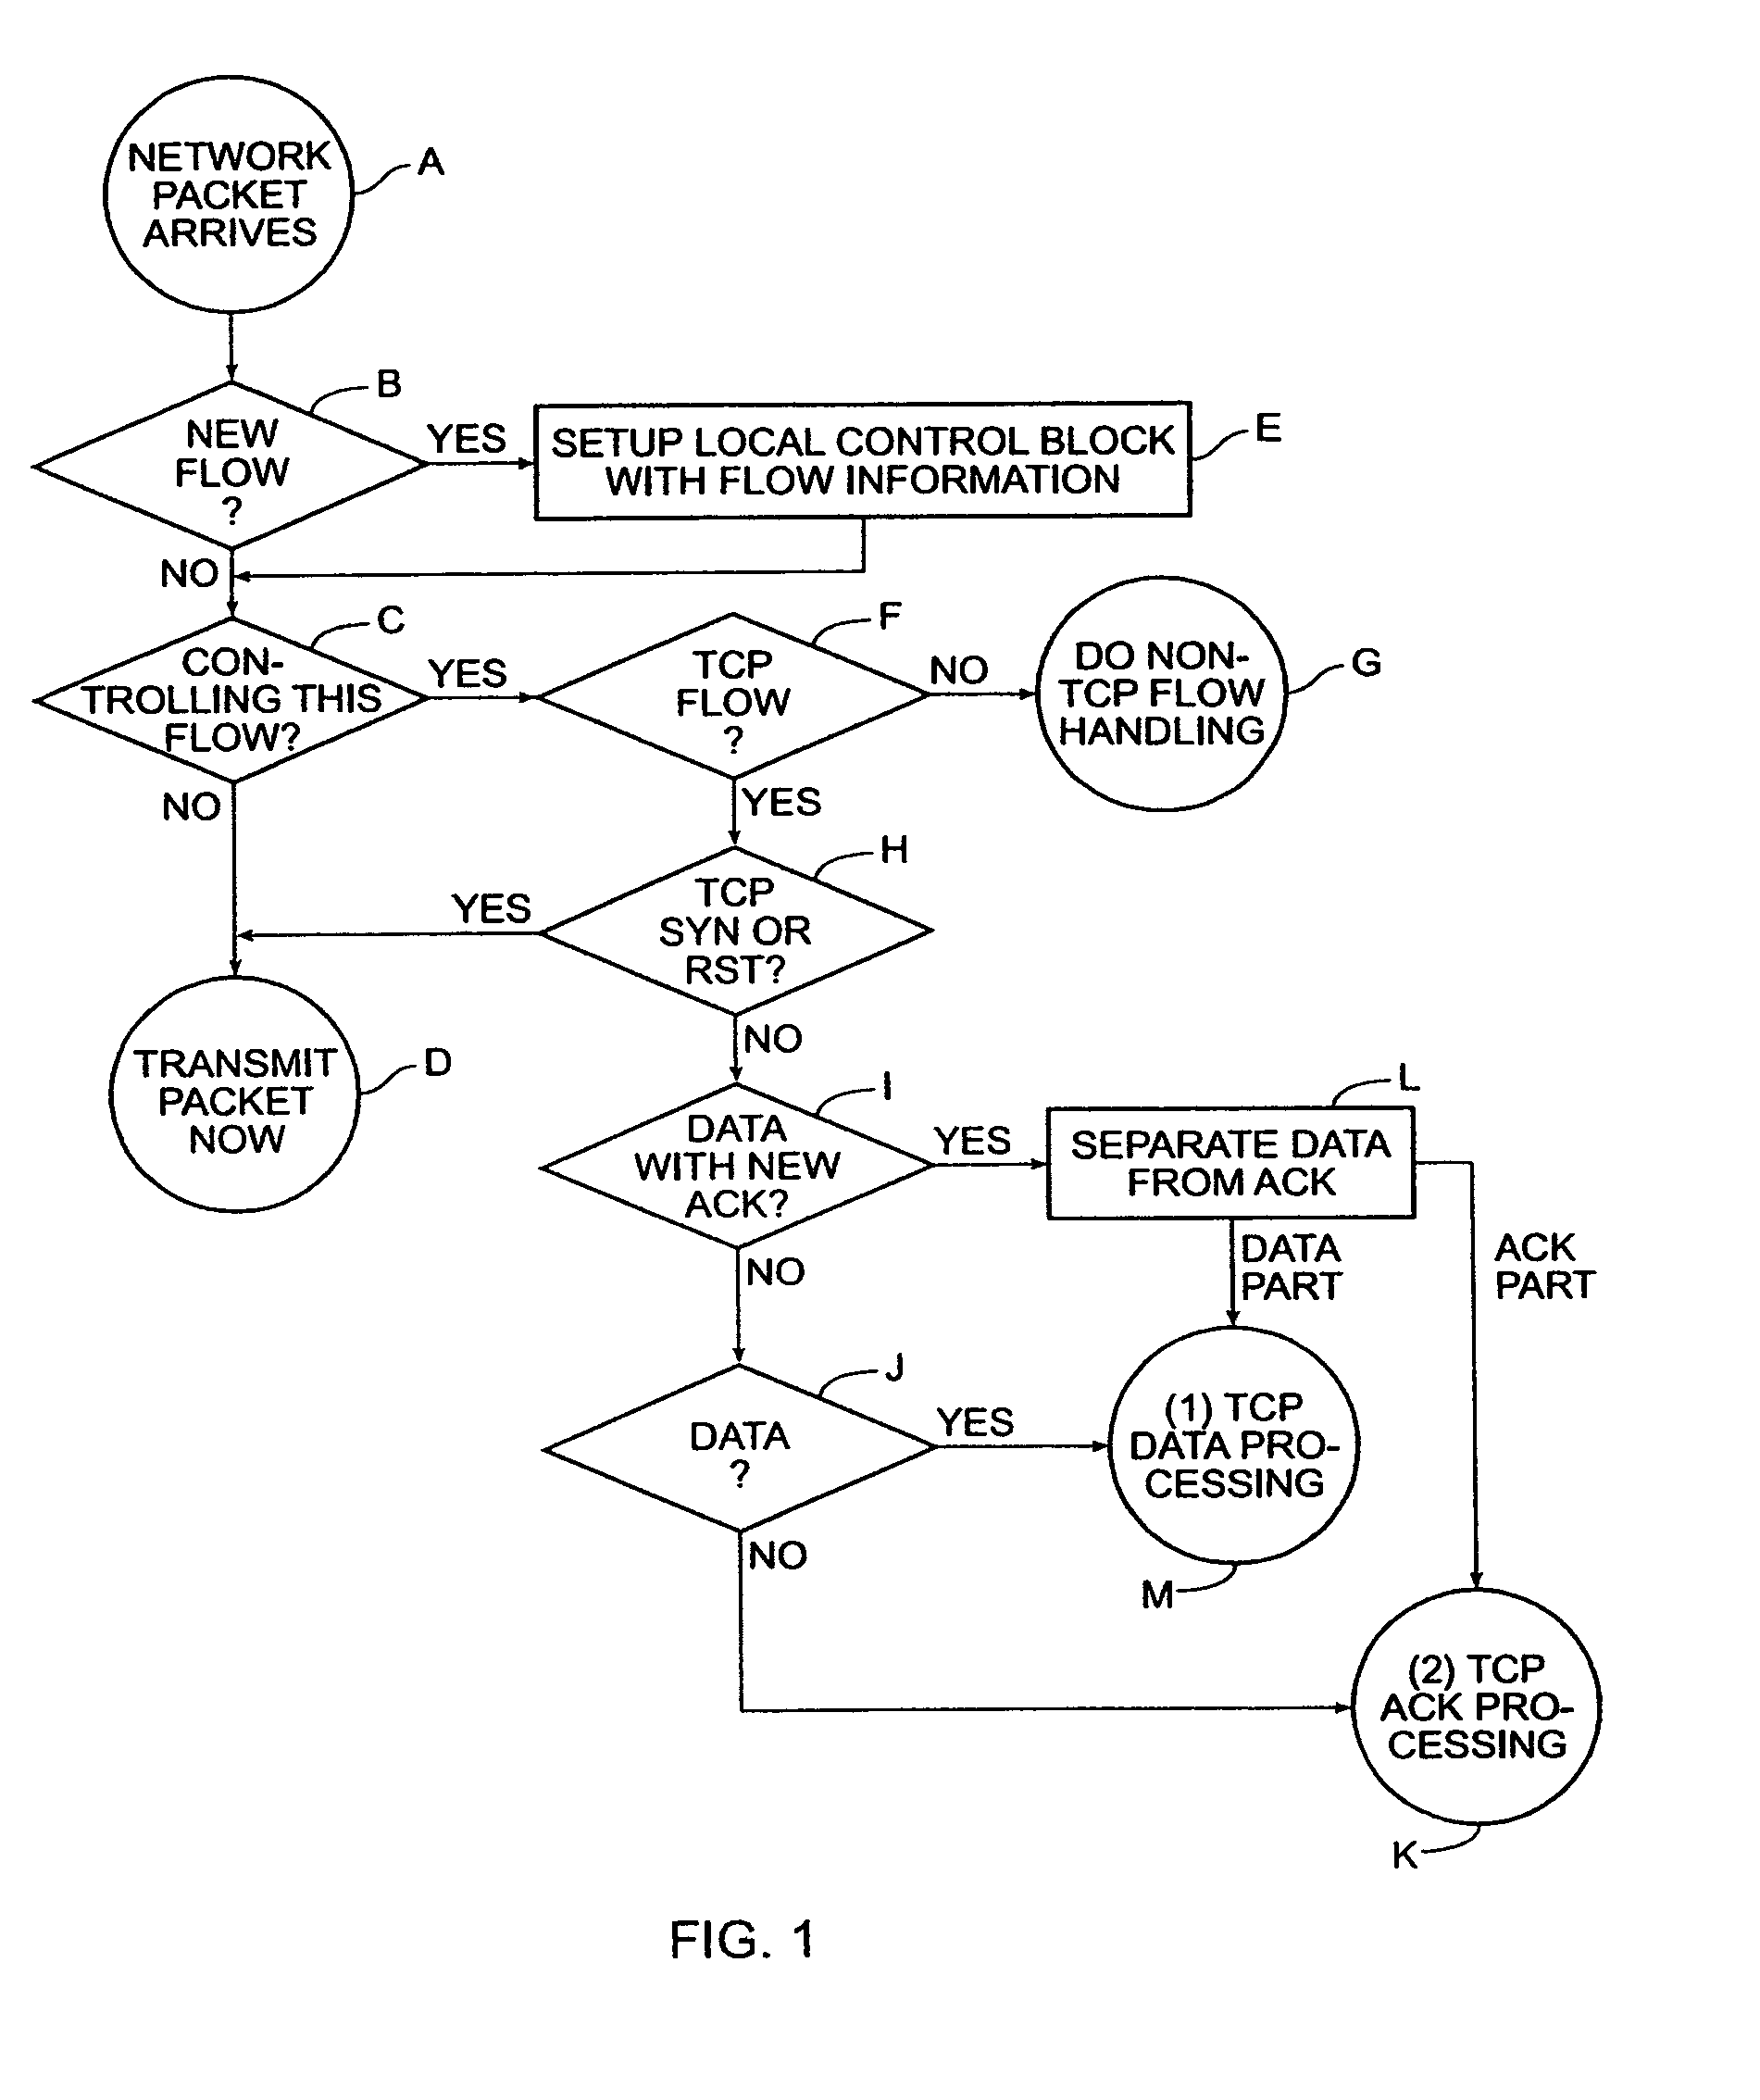 Method and apparatus for controlling transmission flow using explicit rate control and queuing without data rate supervision